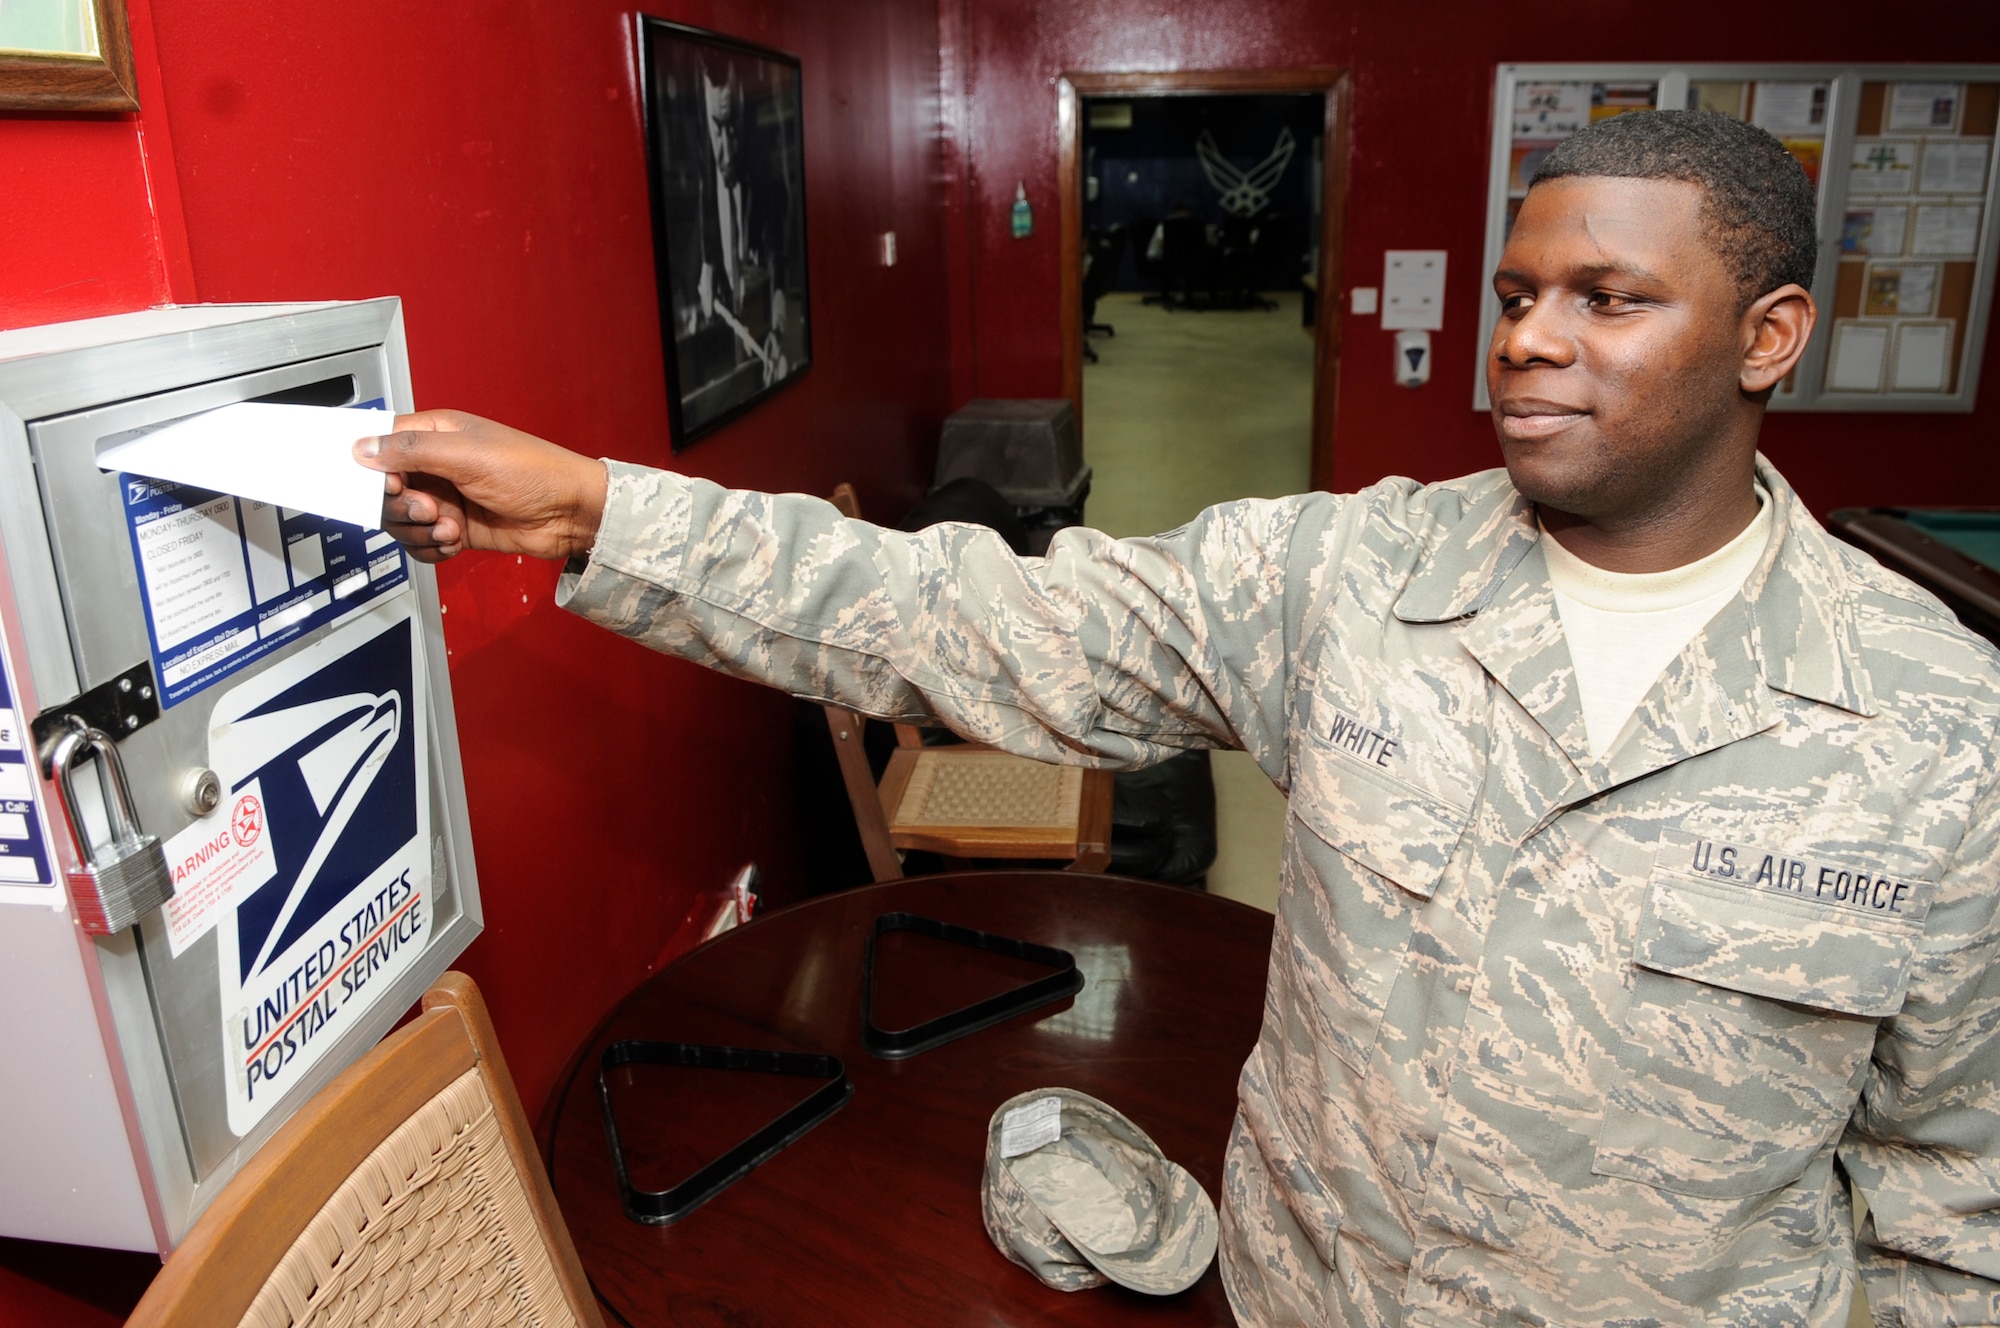 SOUTHWEST ASIA – Senior Airman Kenneth White, 380th Expeditionary Force Support Squadron, puts a letter with “FREE” written on it in a post office receptacle Nov. 12, 2009. Airman White is deployed from the 172nd Airlift Wing, Mississippi Air National Guard Wing, Jackson, Miss., and calls Hattiesburg, Miss., home. (U.S. Air Force photo/Senior Airman Stephen Linch)